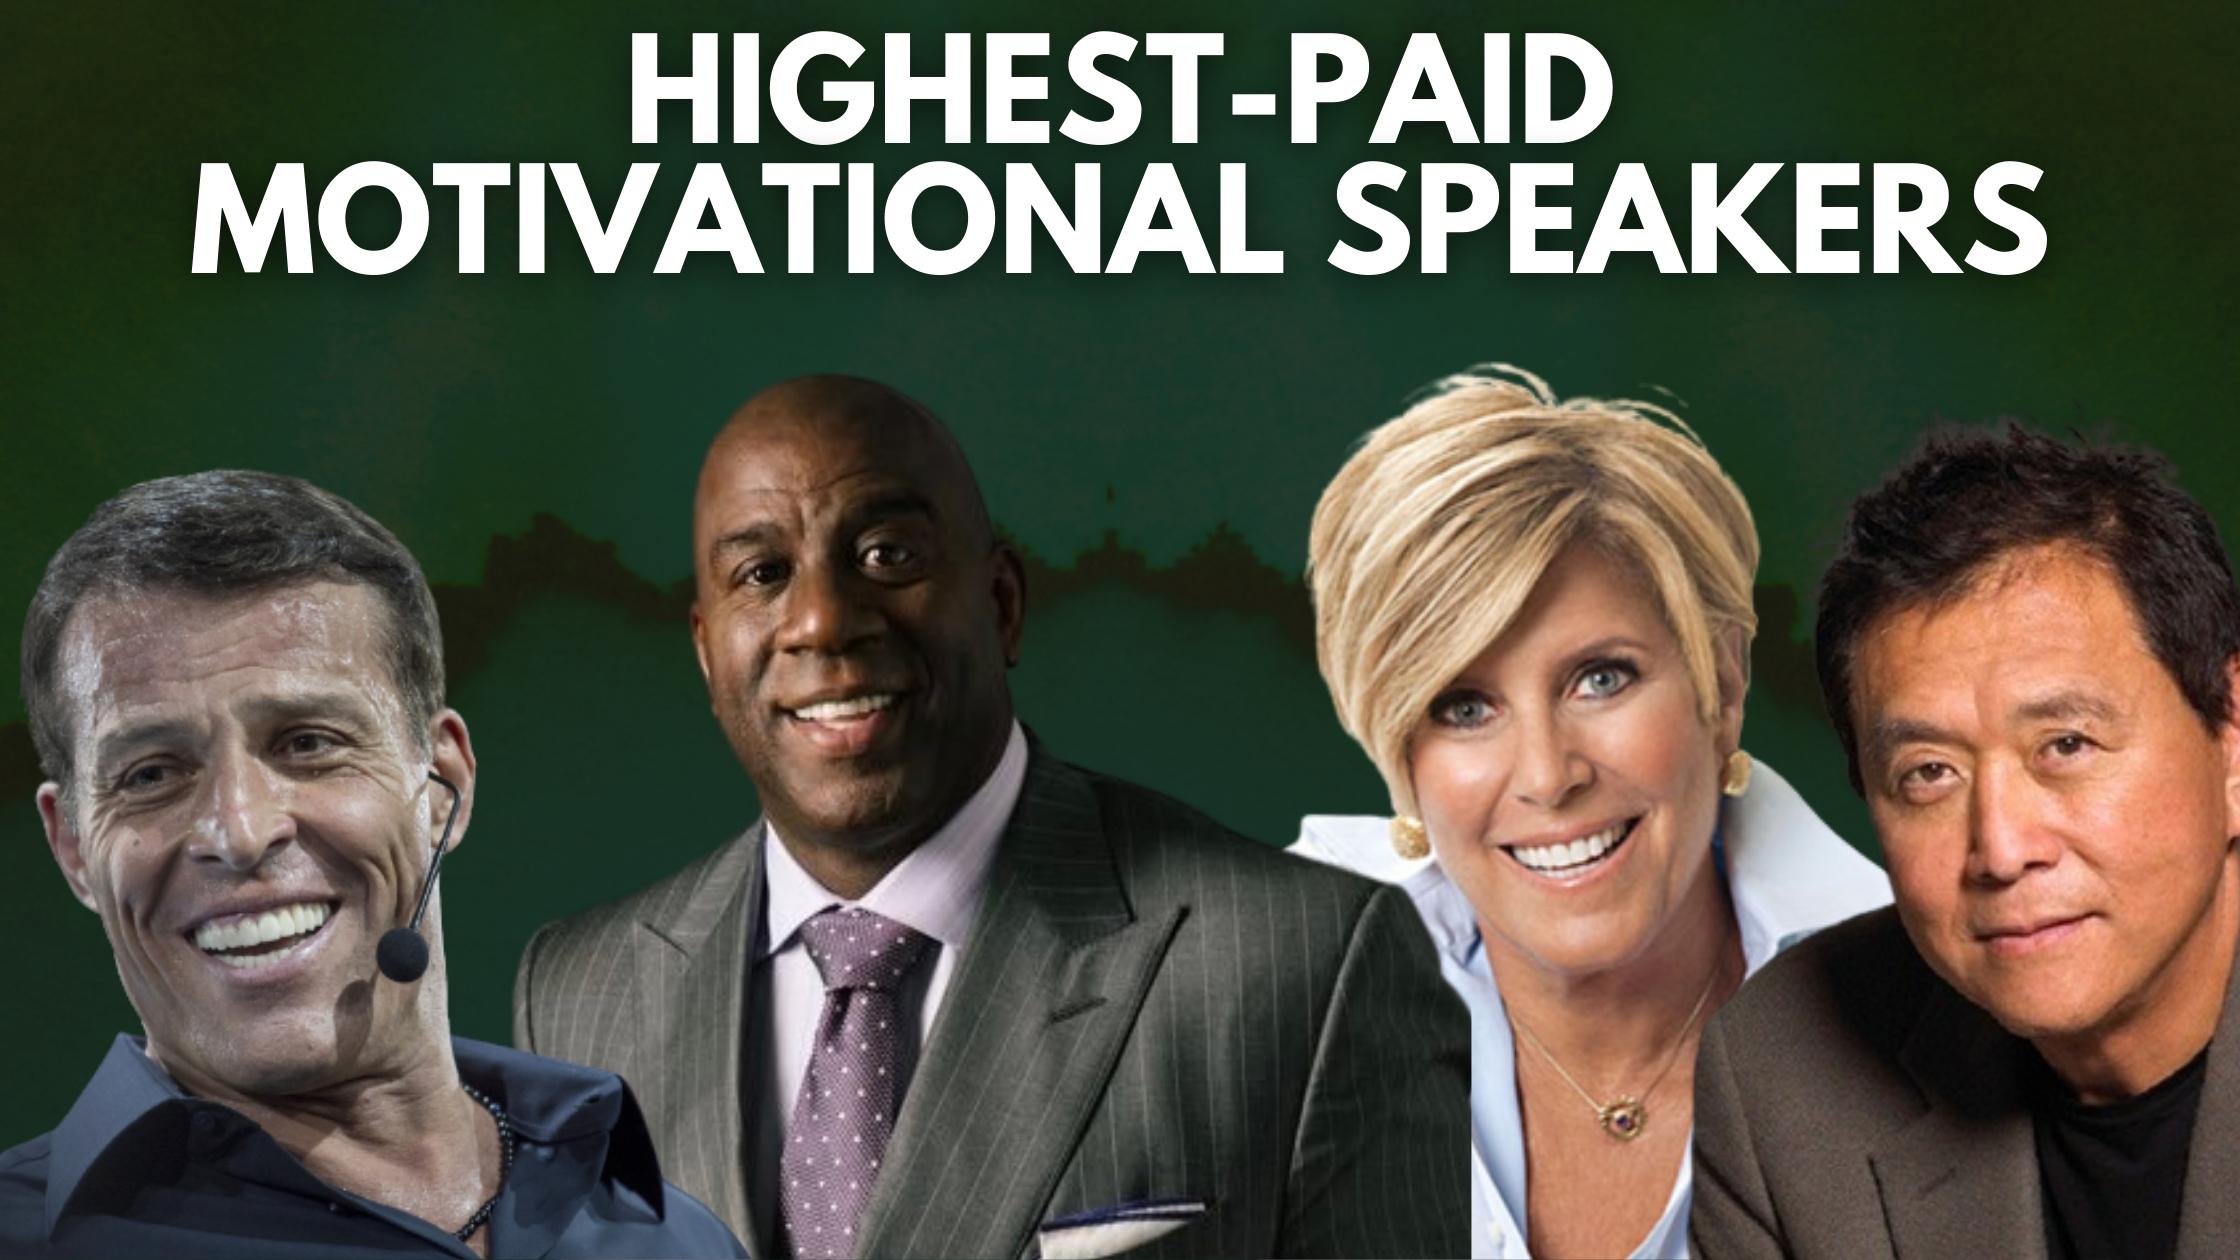 Top 10 Highest-Paid Motivational Speakers In The World